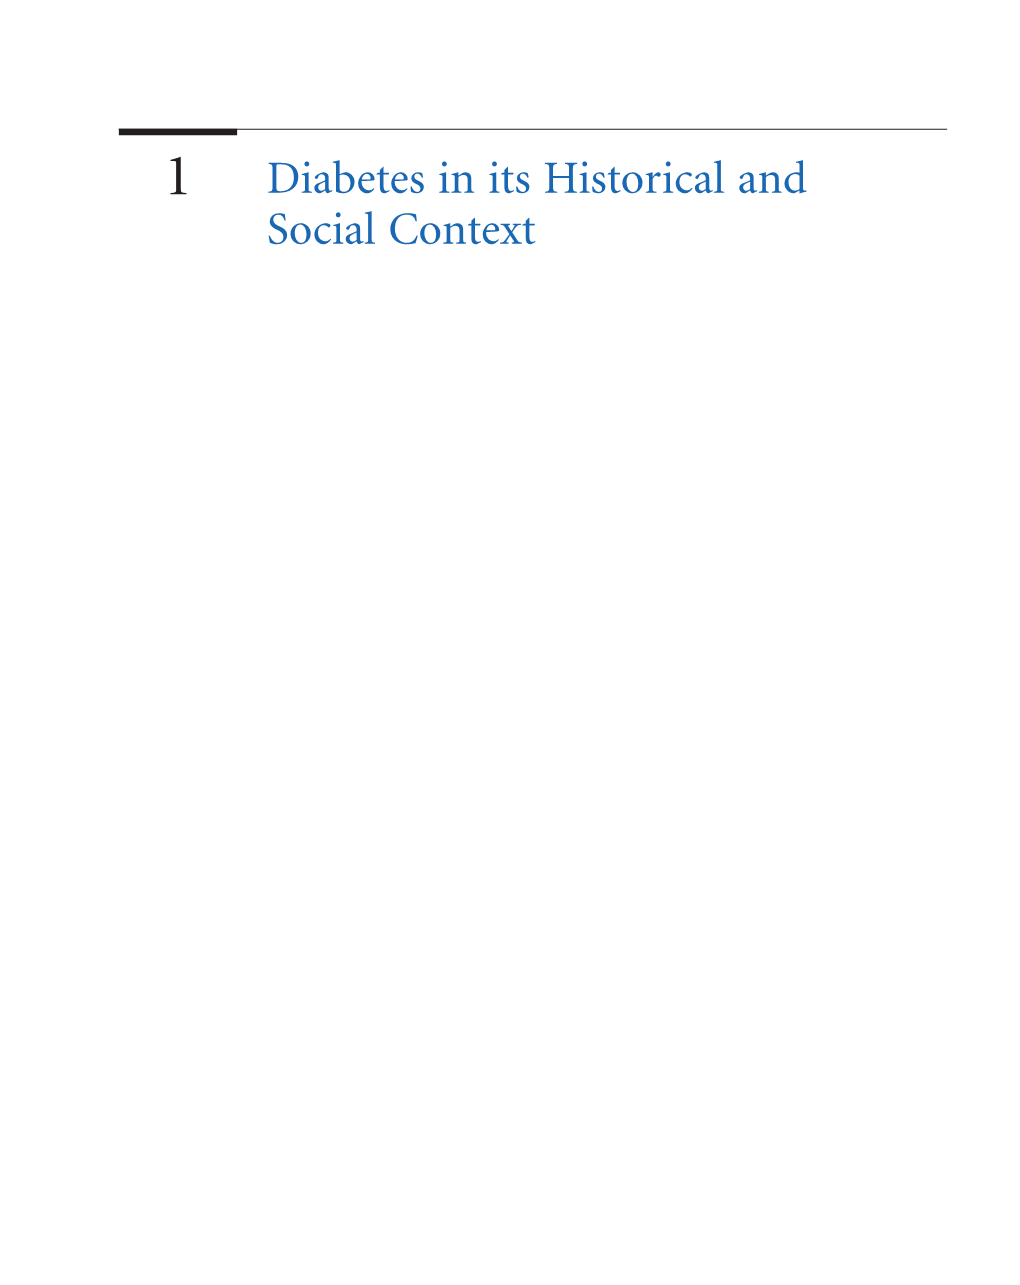 1 Diabetes in Its Historical and Social Context